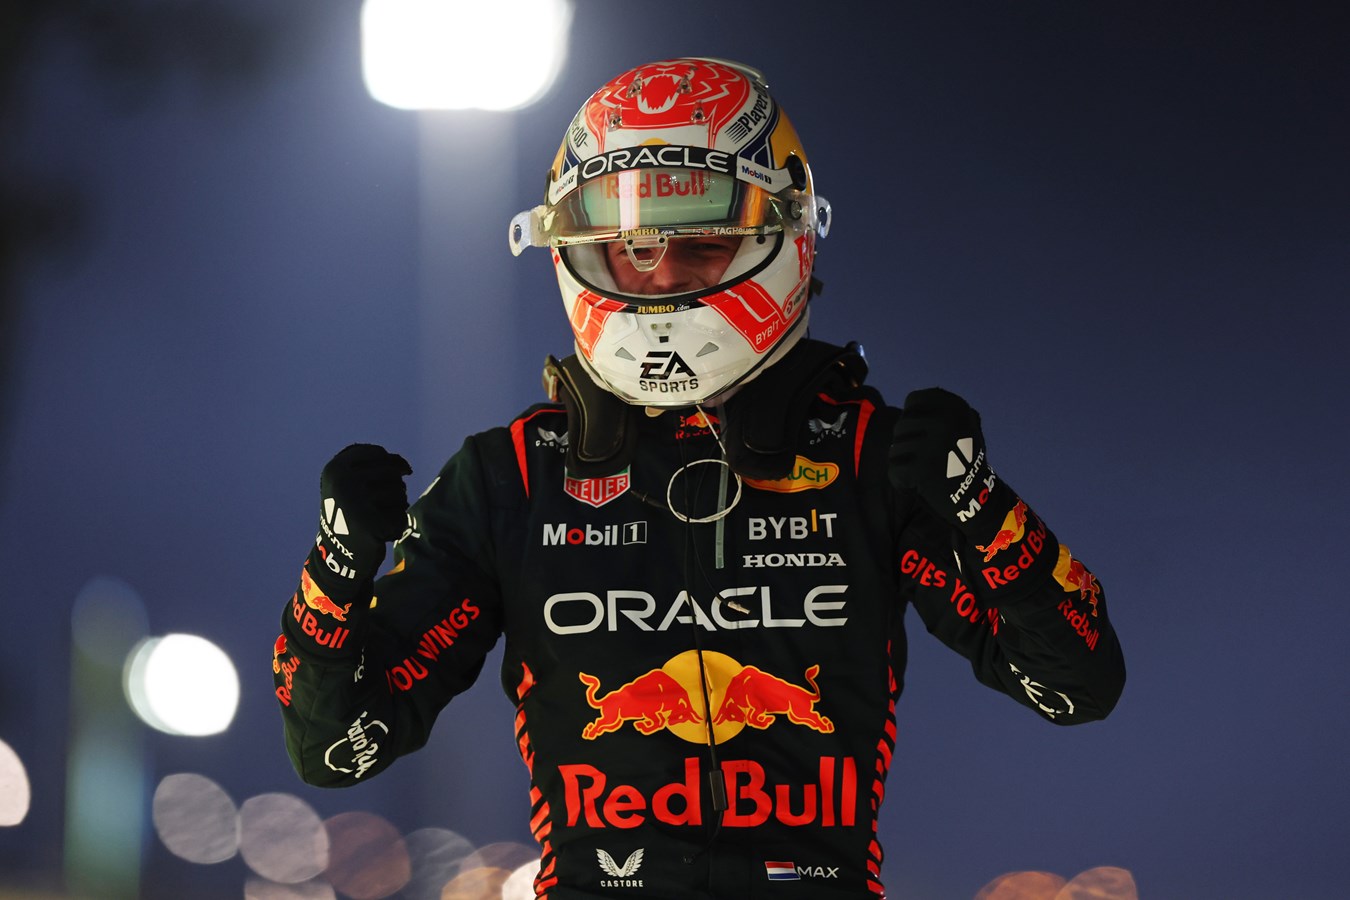 Oracle Red Bull Racing finishes 1-2 in Bahrain GP